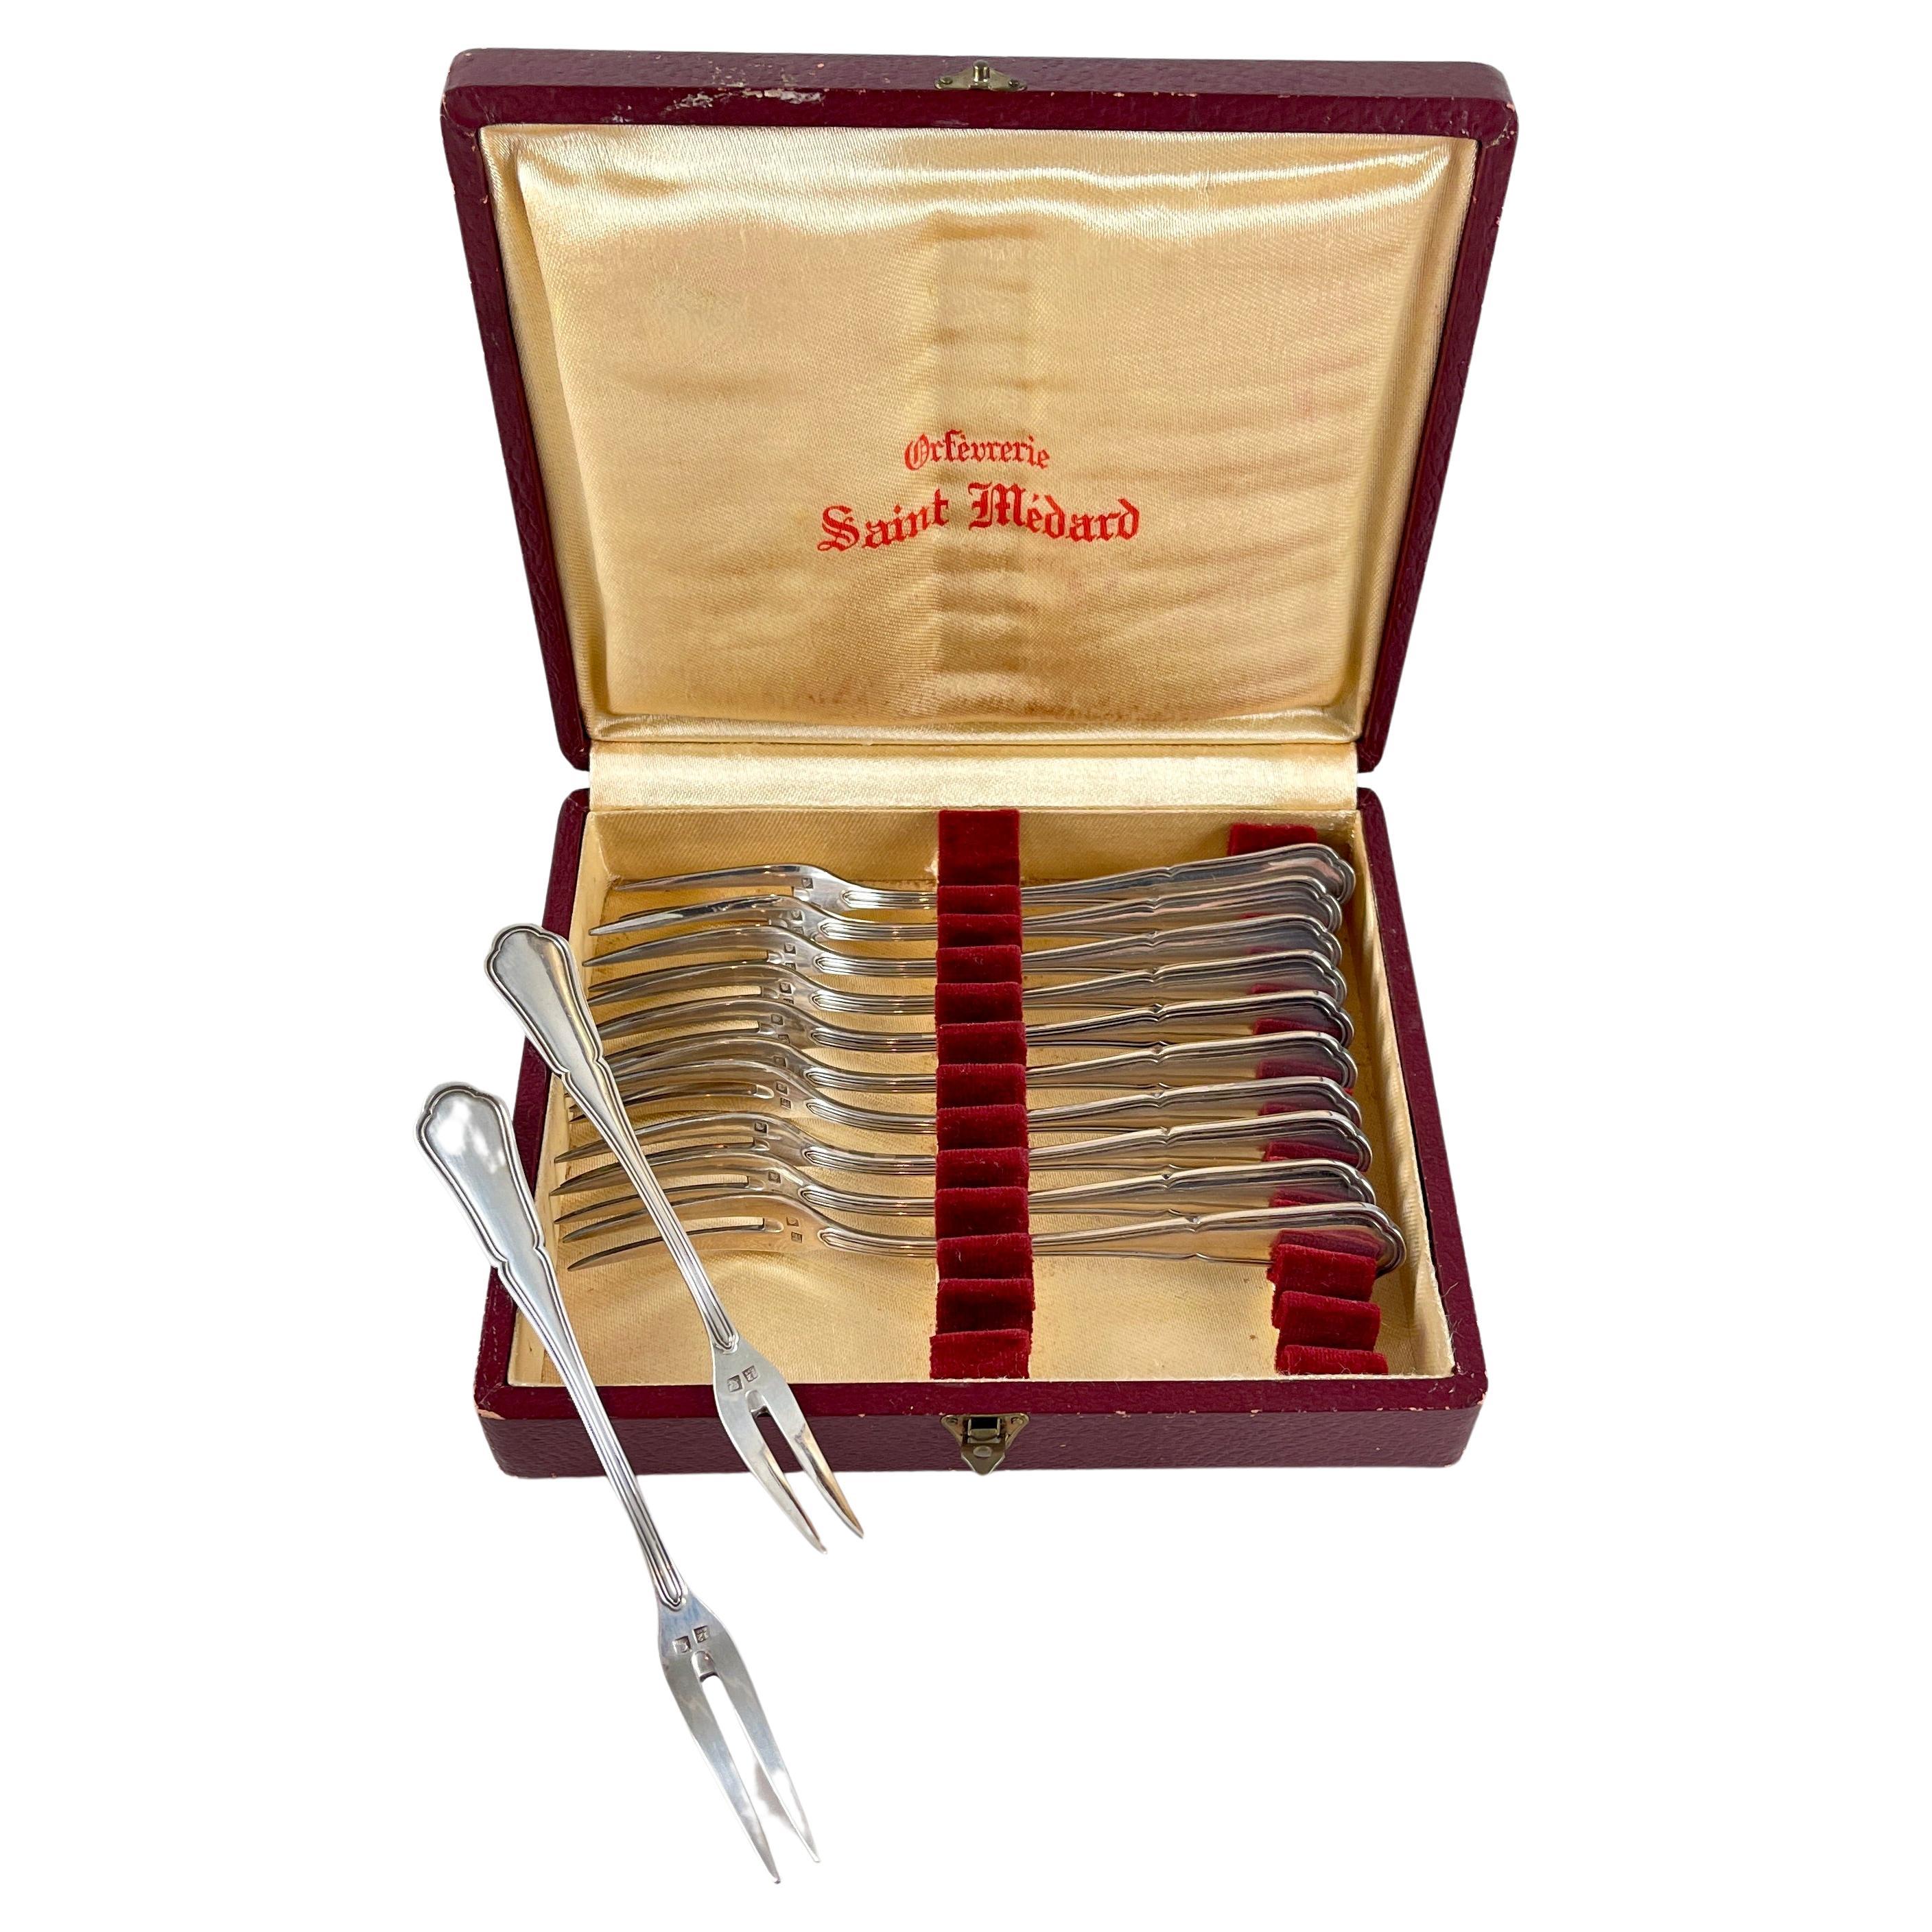 Orfeverie Saint- Médard French Silver Cocktail Forks, Boxed Set of 12